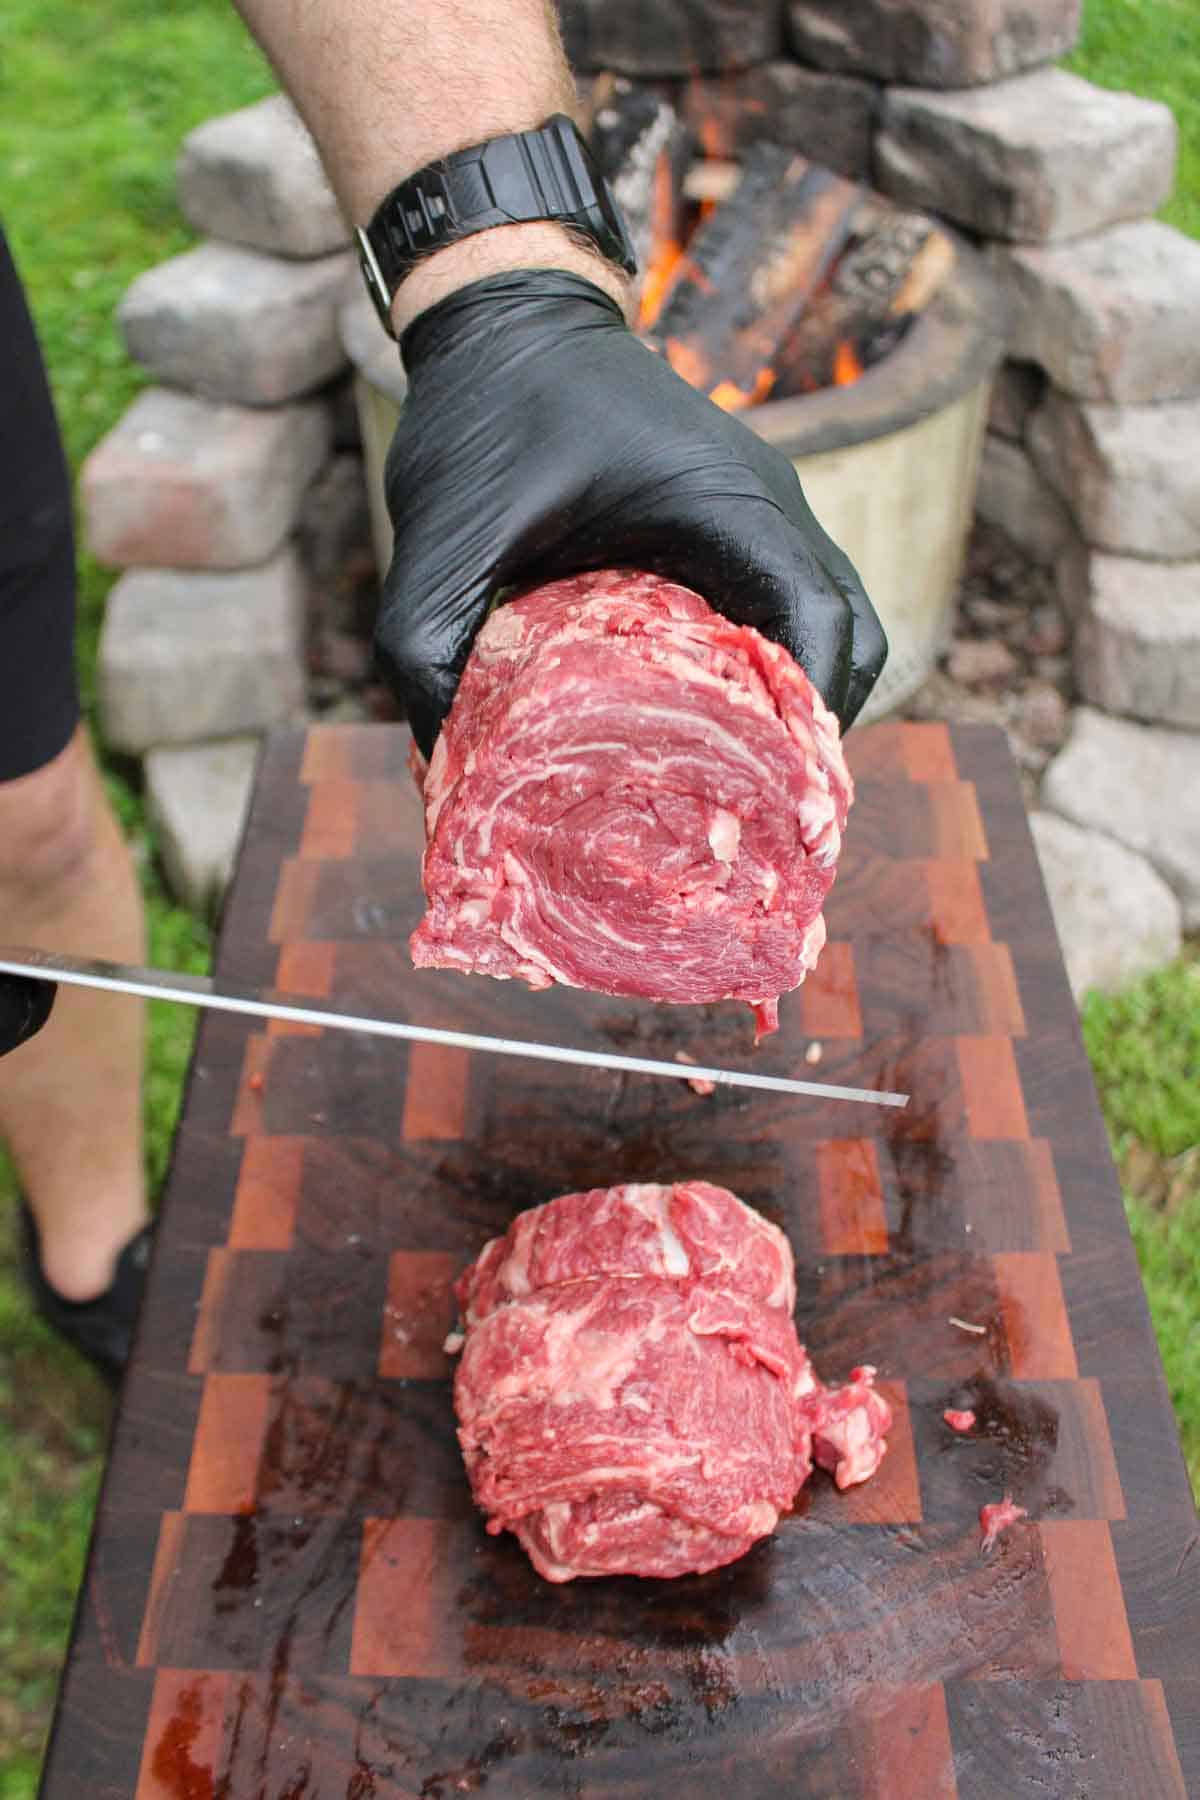 Slicing the ribeye caps into individual steaks.